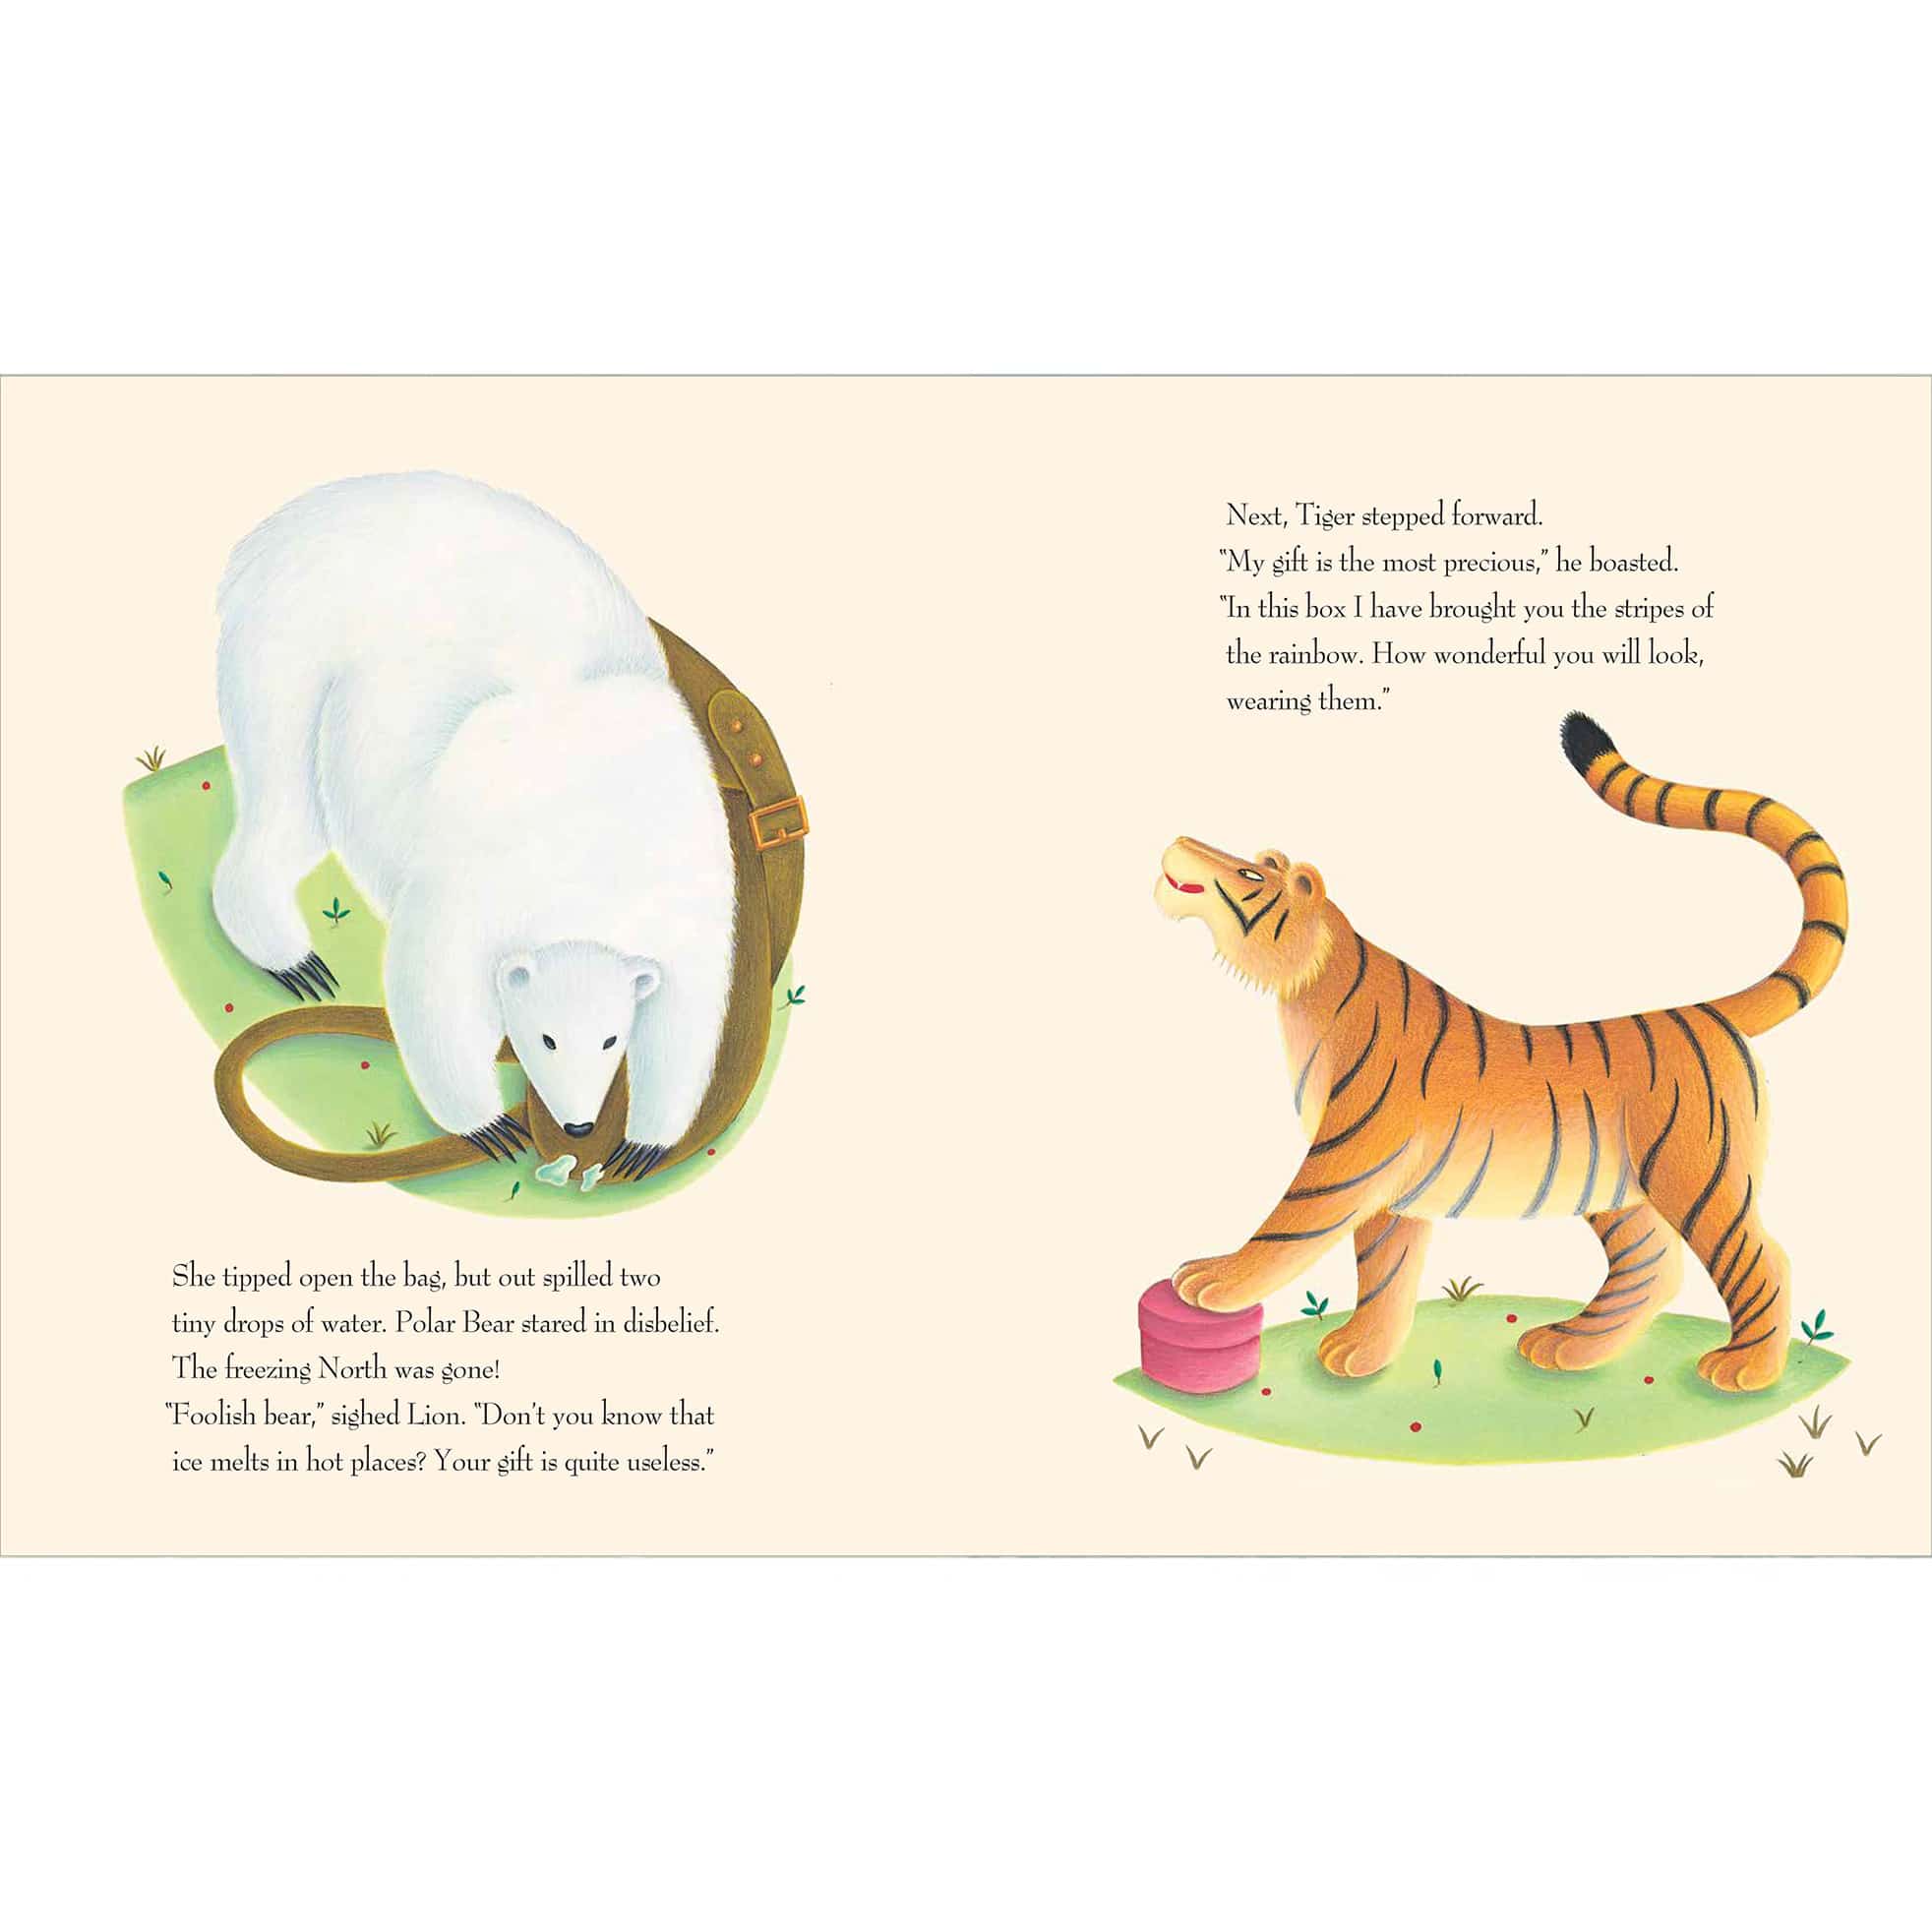 Lion's Precious Gift  Signed by the Illustrator Amanda Hall